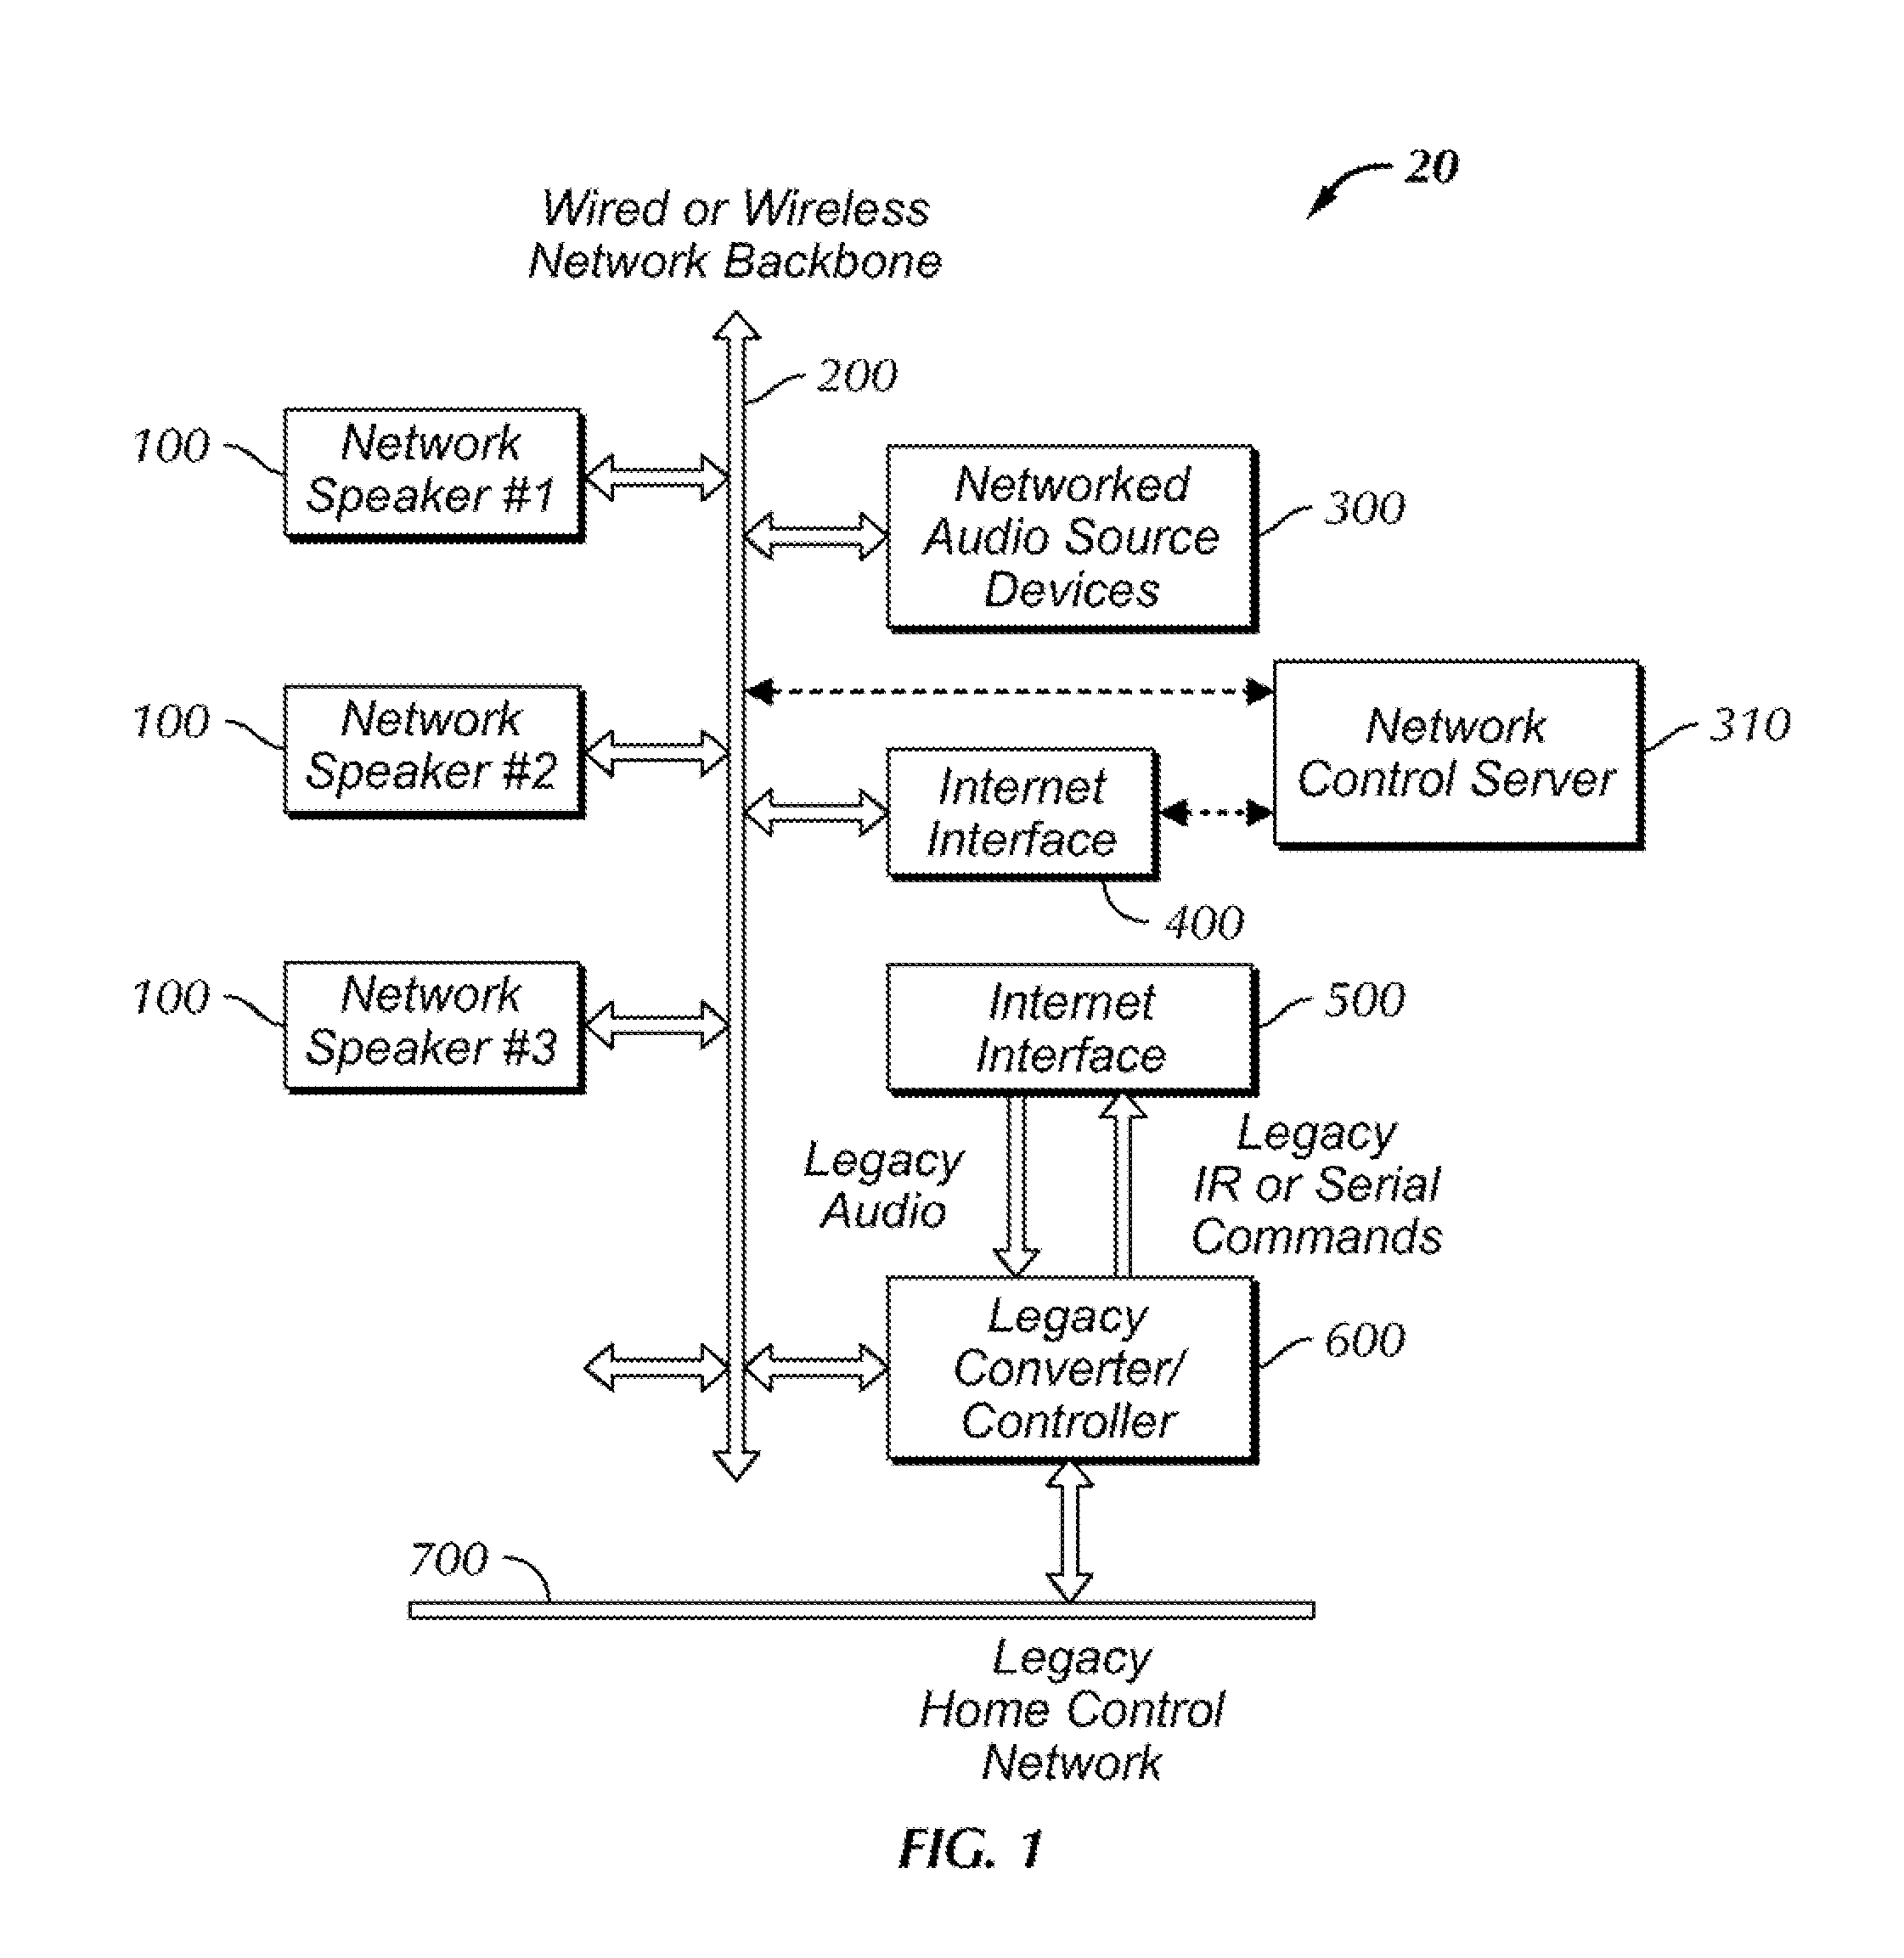 Network Speaker for an Audio Network Distribution System